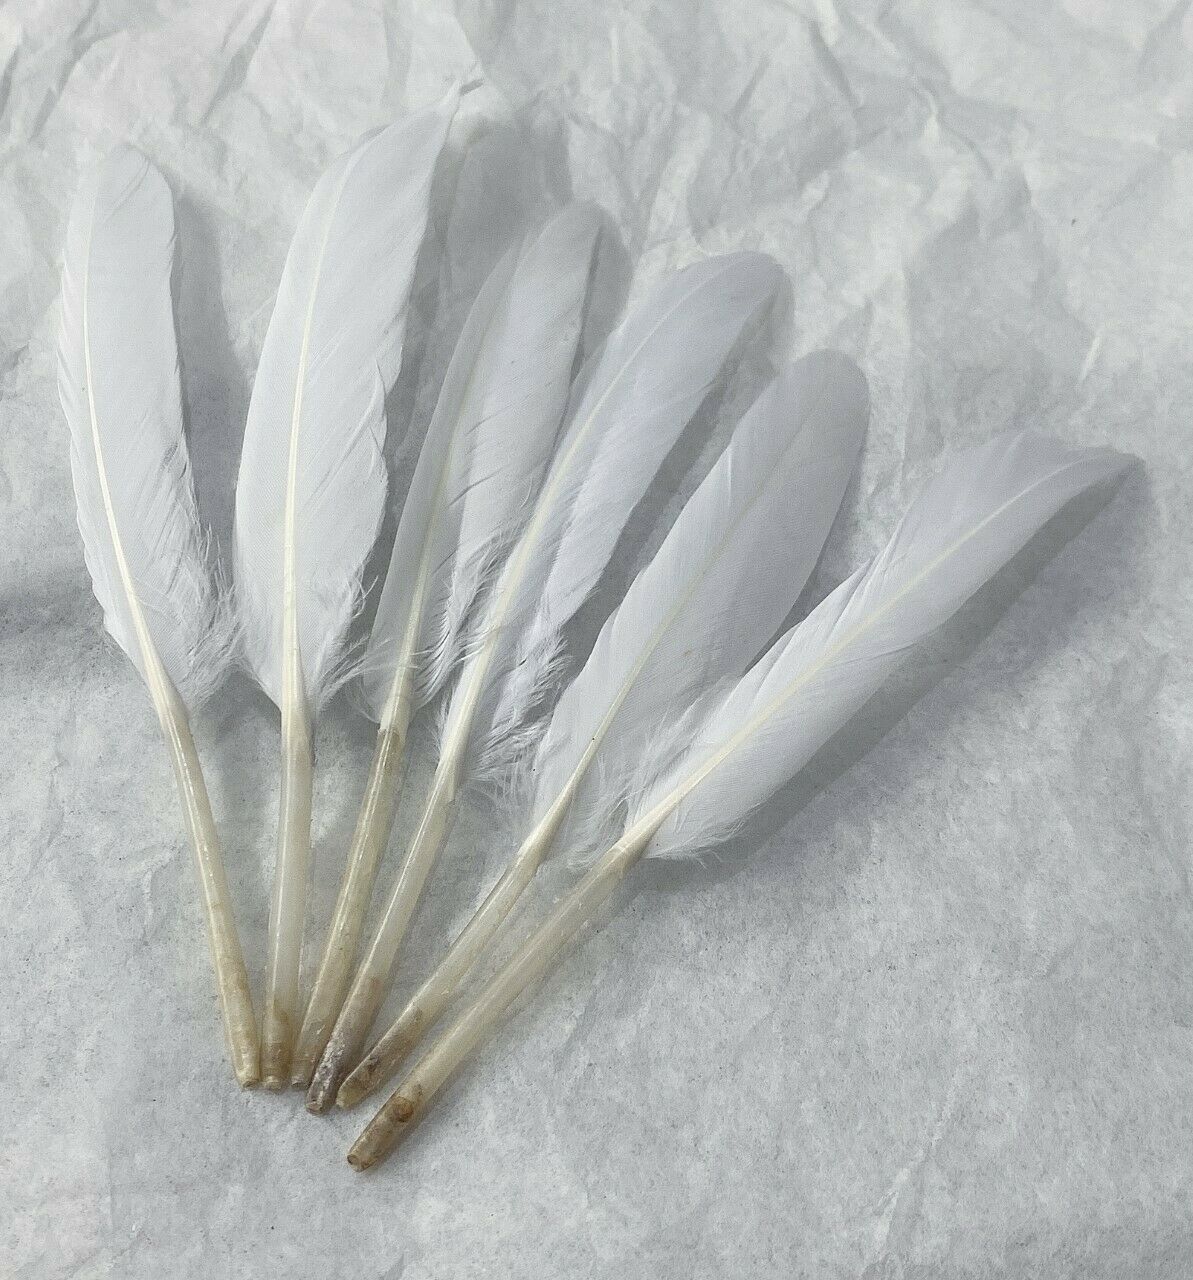 50 x Goose Feathers Pack, 10 - 15cm Arts & Crafts Fancy Dress Making Feather UK